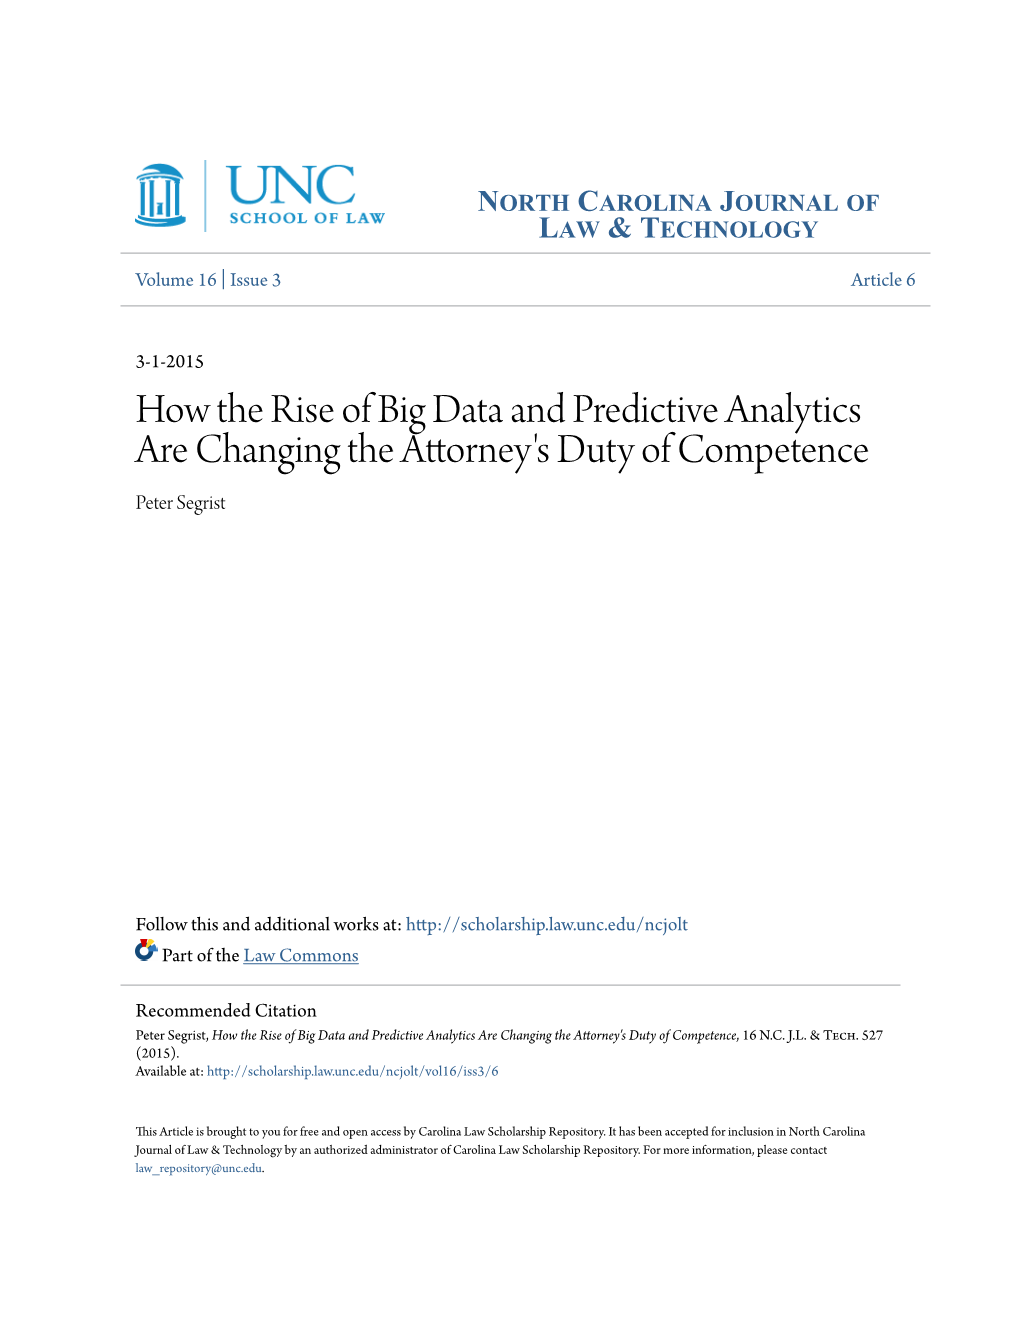 How the Rise of Big Data and Predictive Analytics Are Changing the Attorney's Duty of Competence Peter Segrist